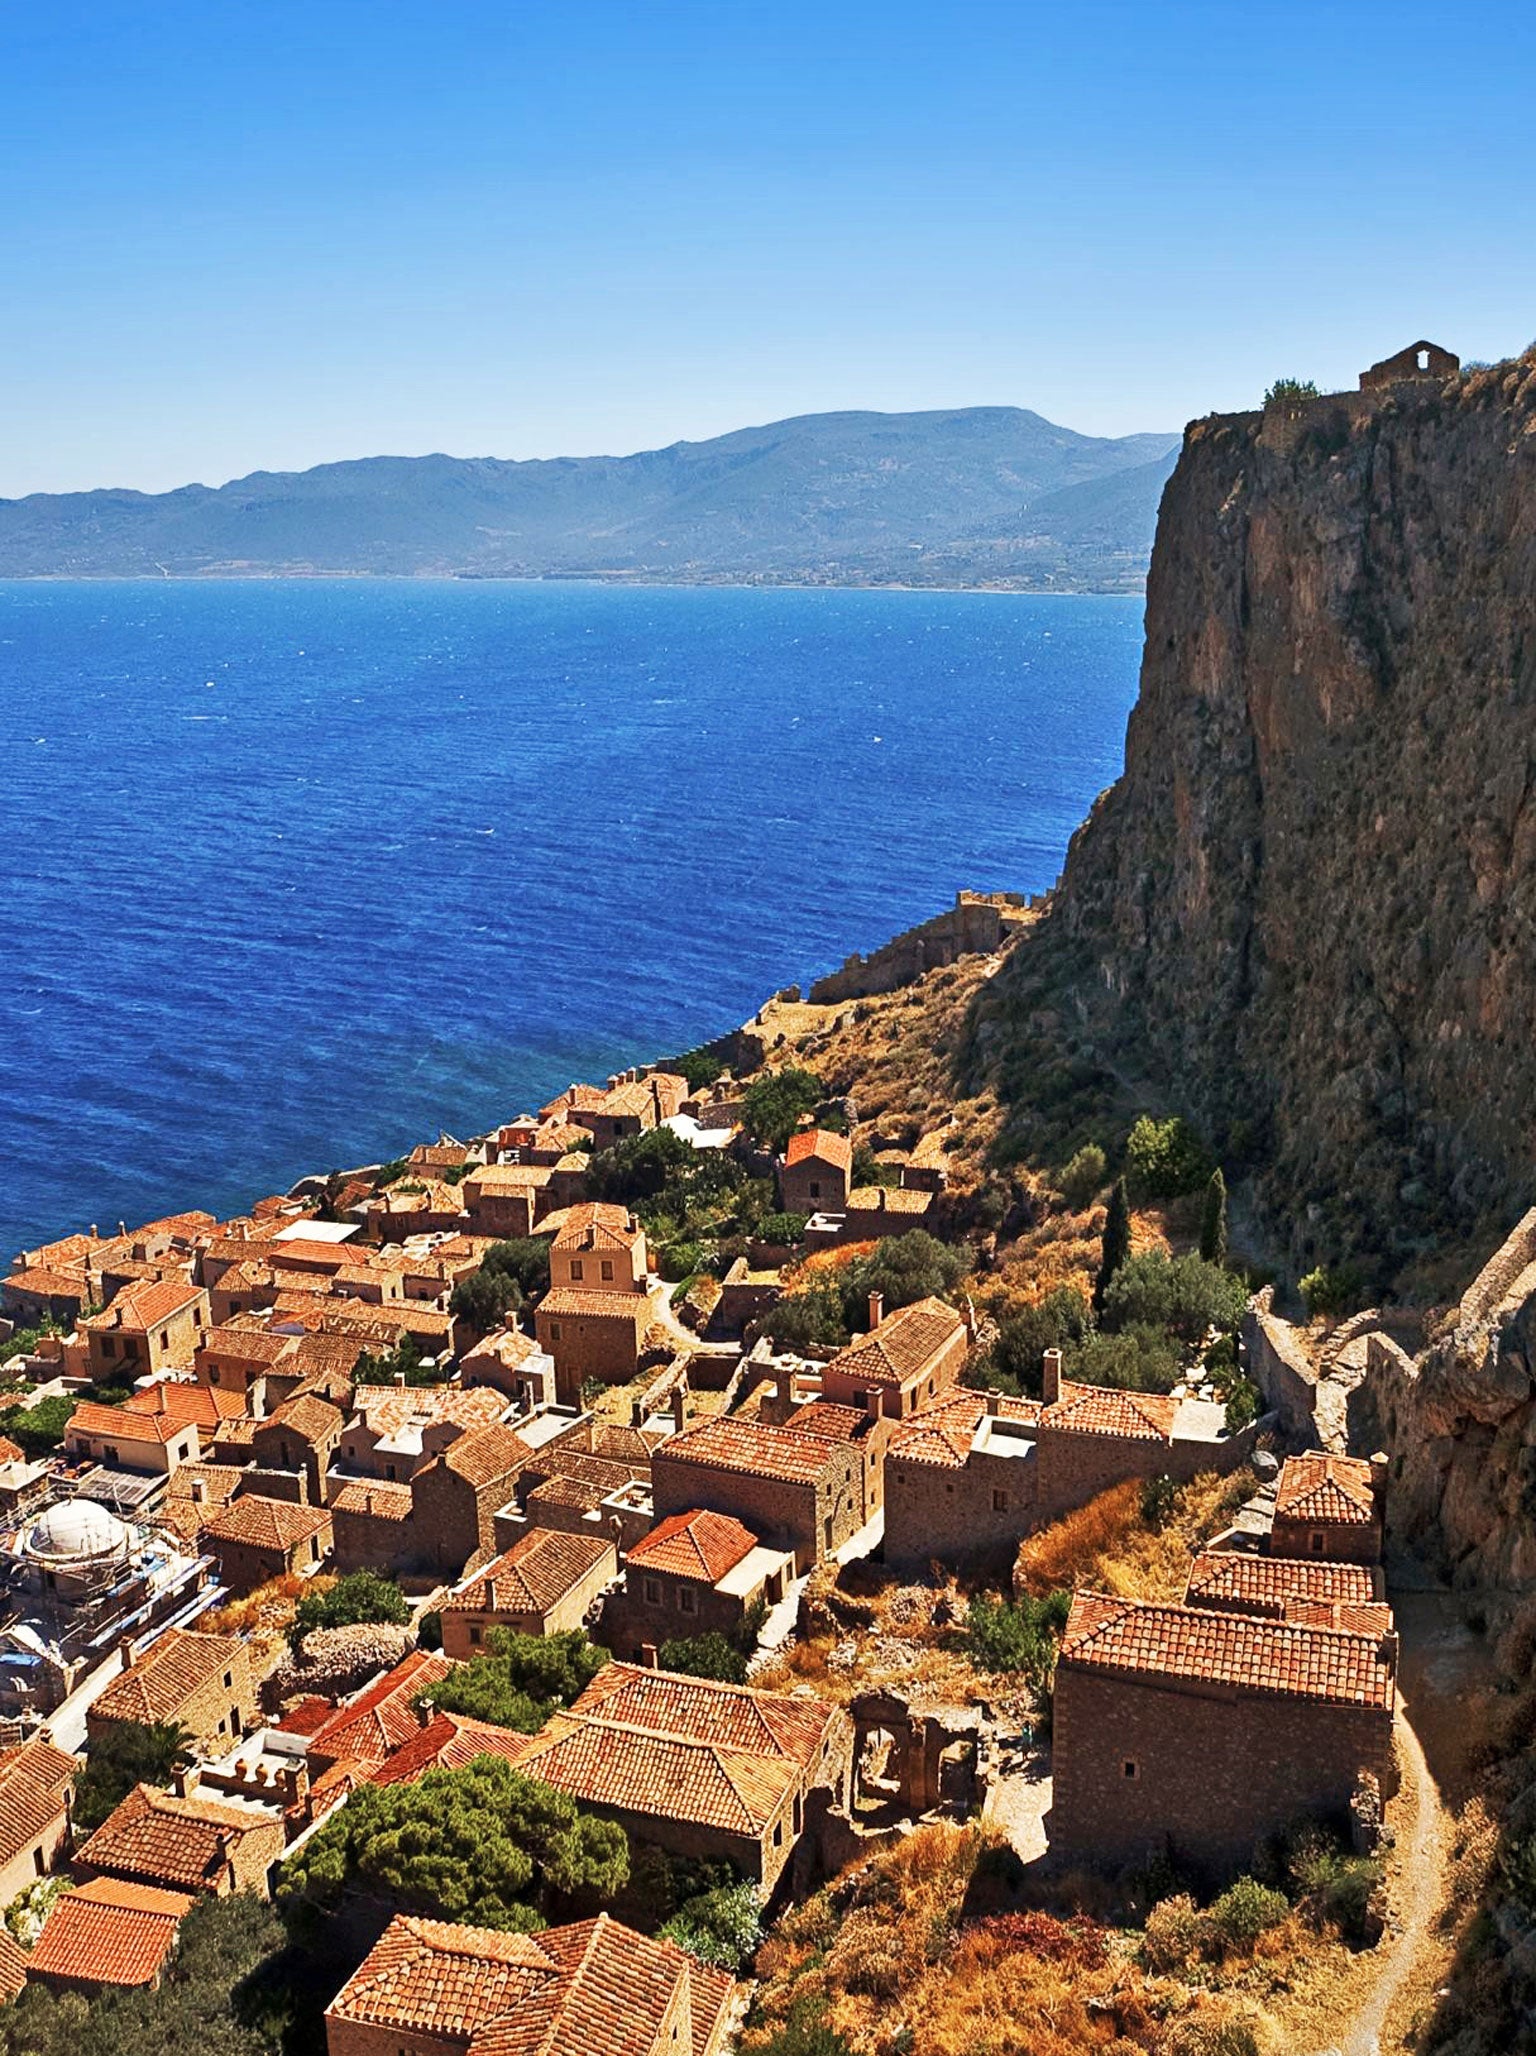 Greece is the word: the hill town of Monemvasia